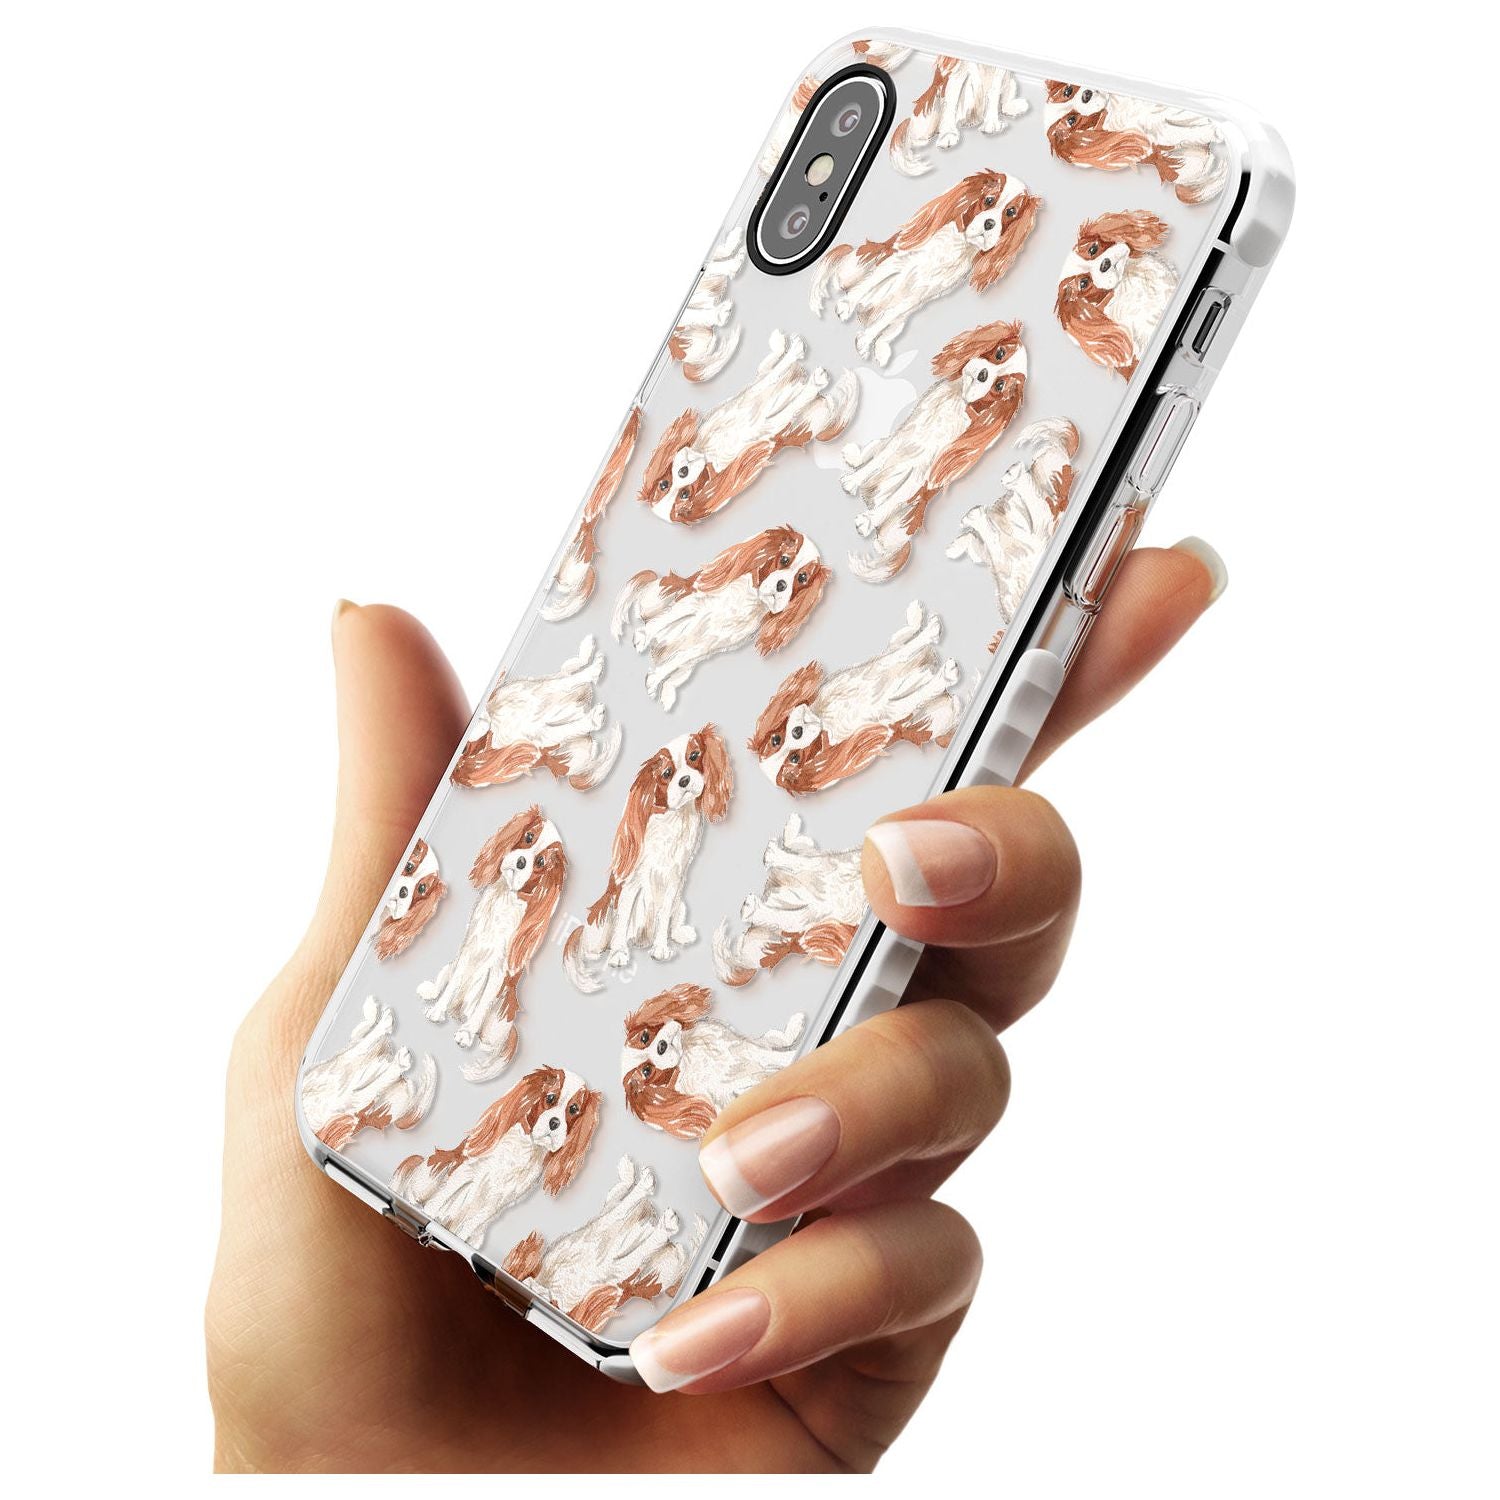 Cavalier King Charles Spaniel Dog Pattern Impact Phone Case for iPhone X XS Max XR